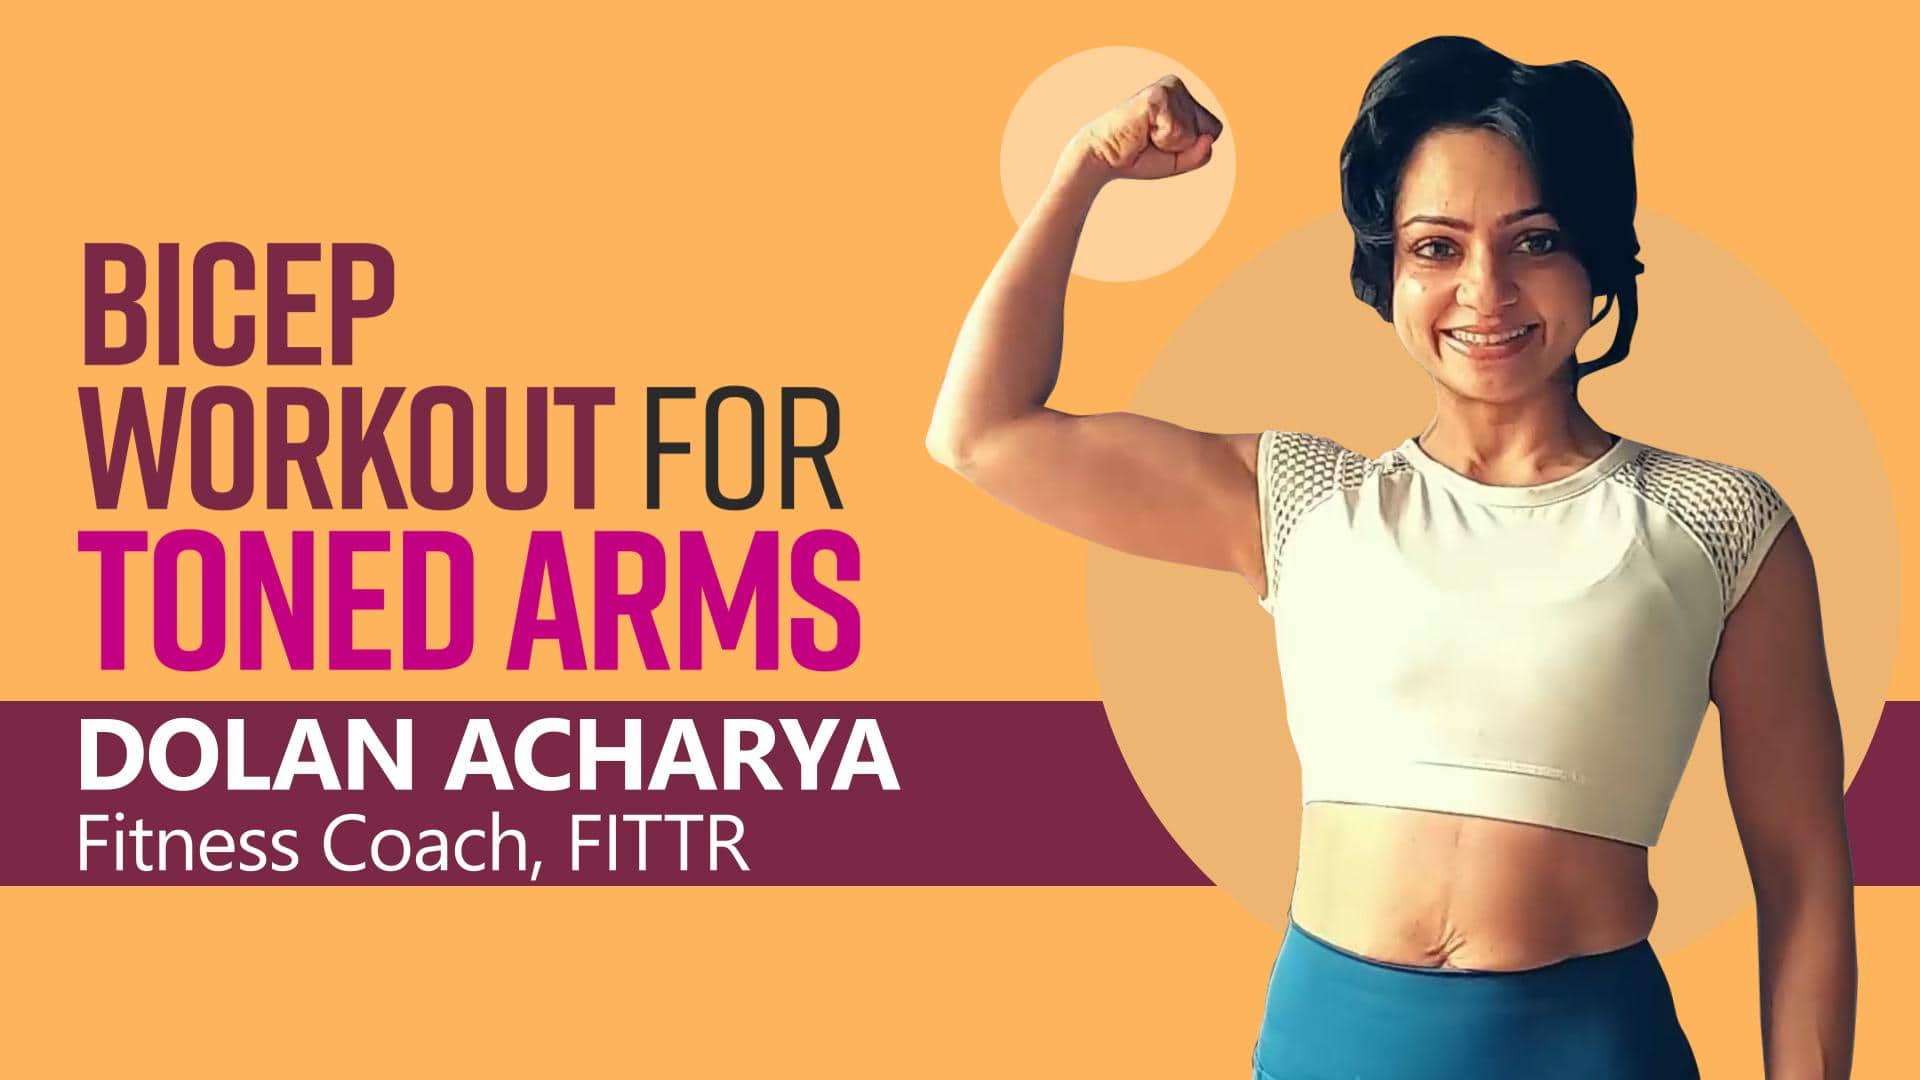 How To Get Toned Arms : 5 Easy Bicep Workout Exercises Explained By Fitness  Coach Dolan Acharya